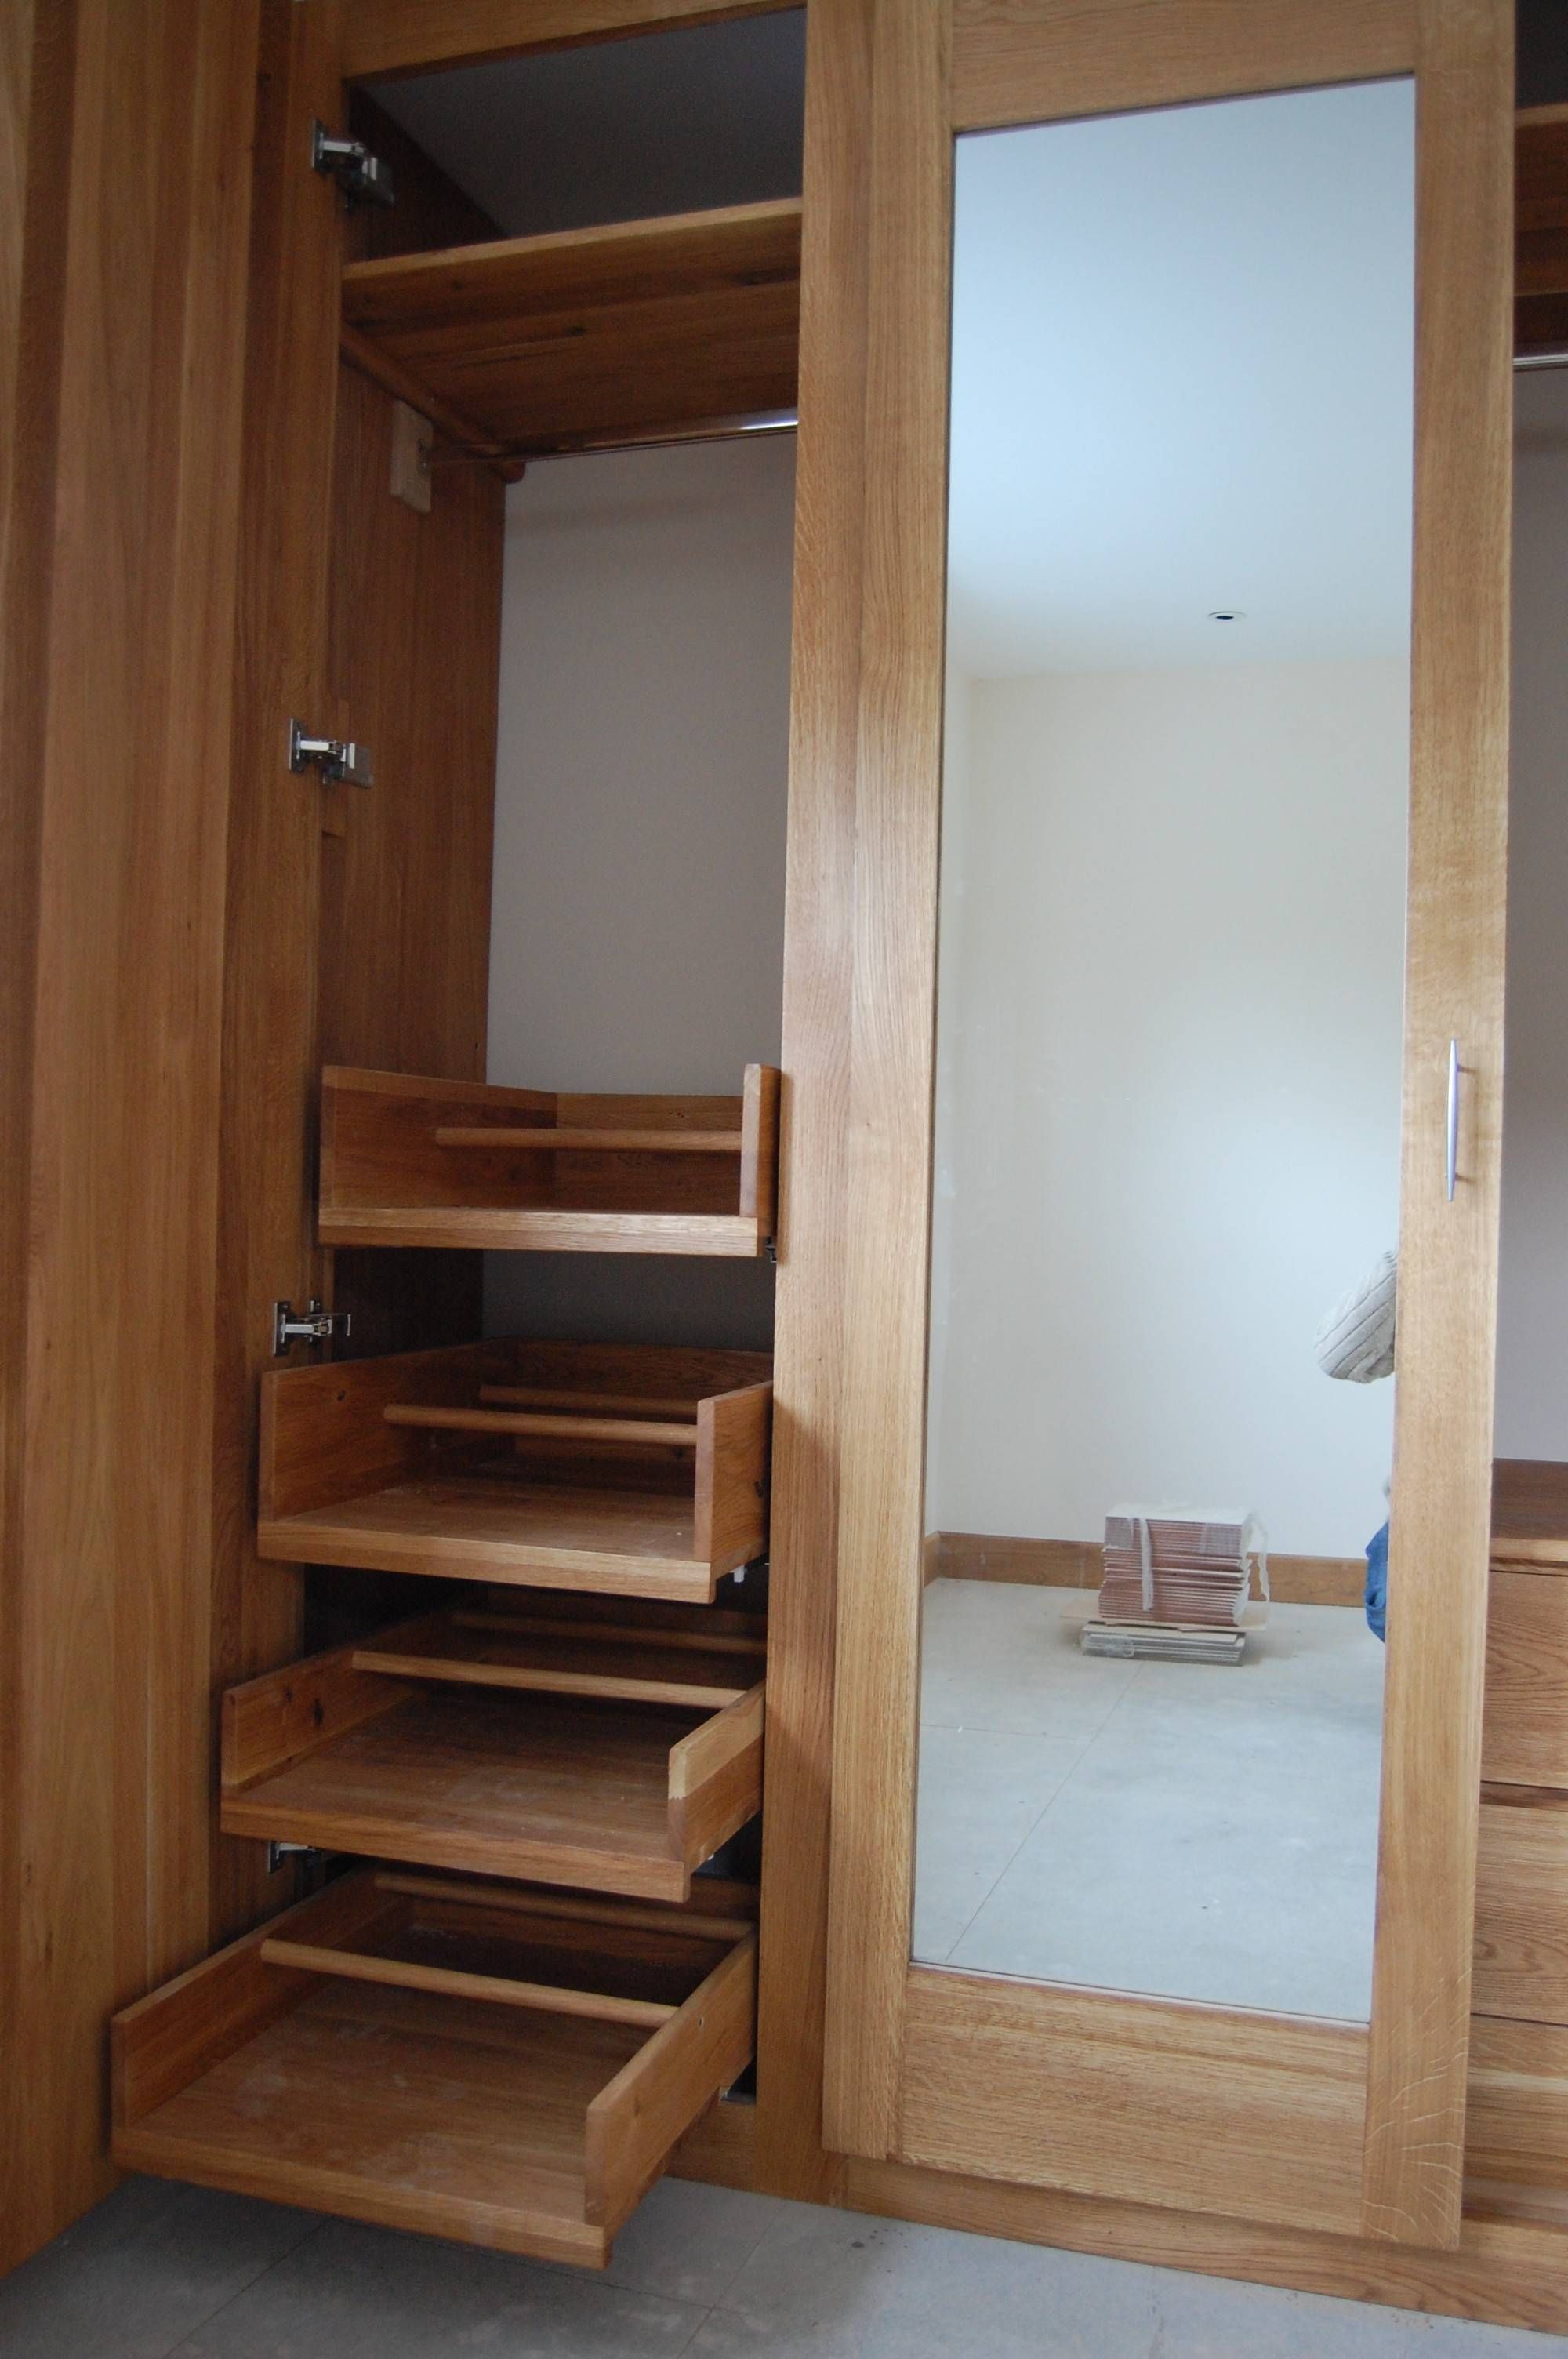 Wooden Wardrobe With Shelves | Kashiori Wooden Sofa, Chair Regarding Single Wardrobe With Drawers And Shelves (View 7 of 30)